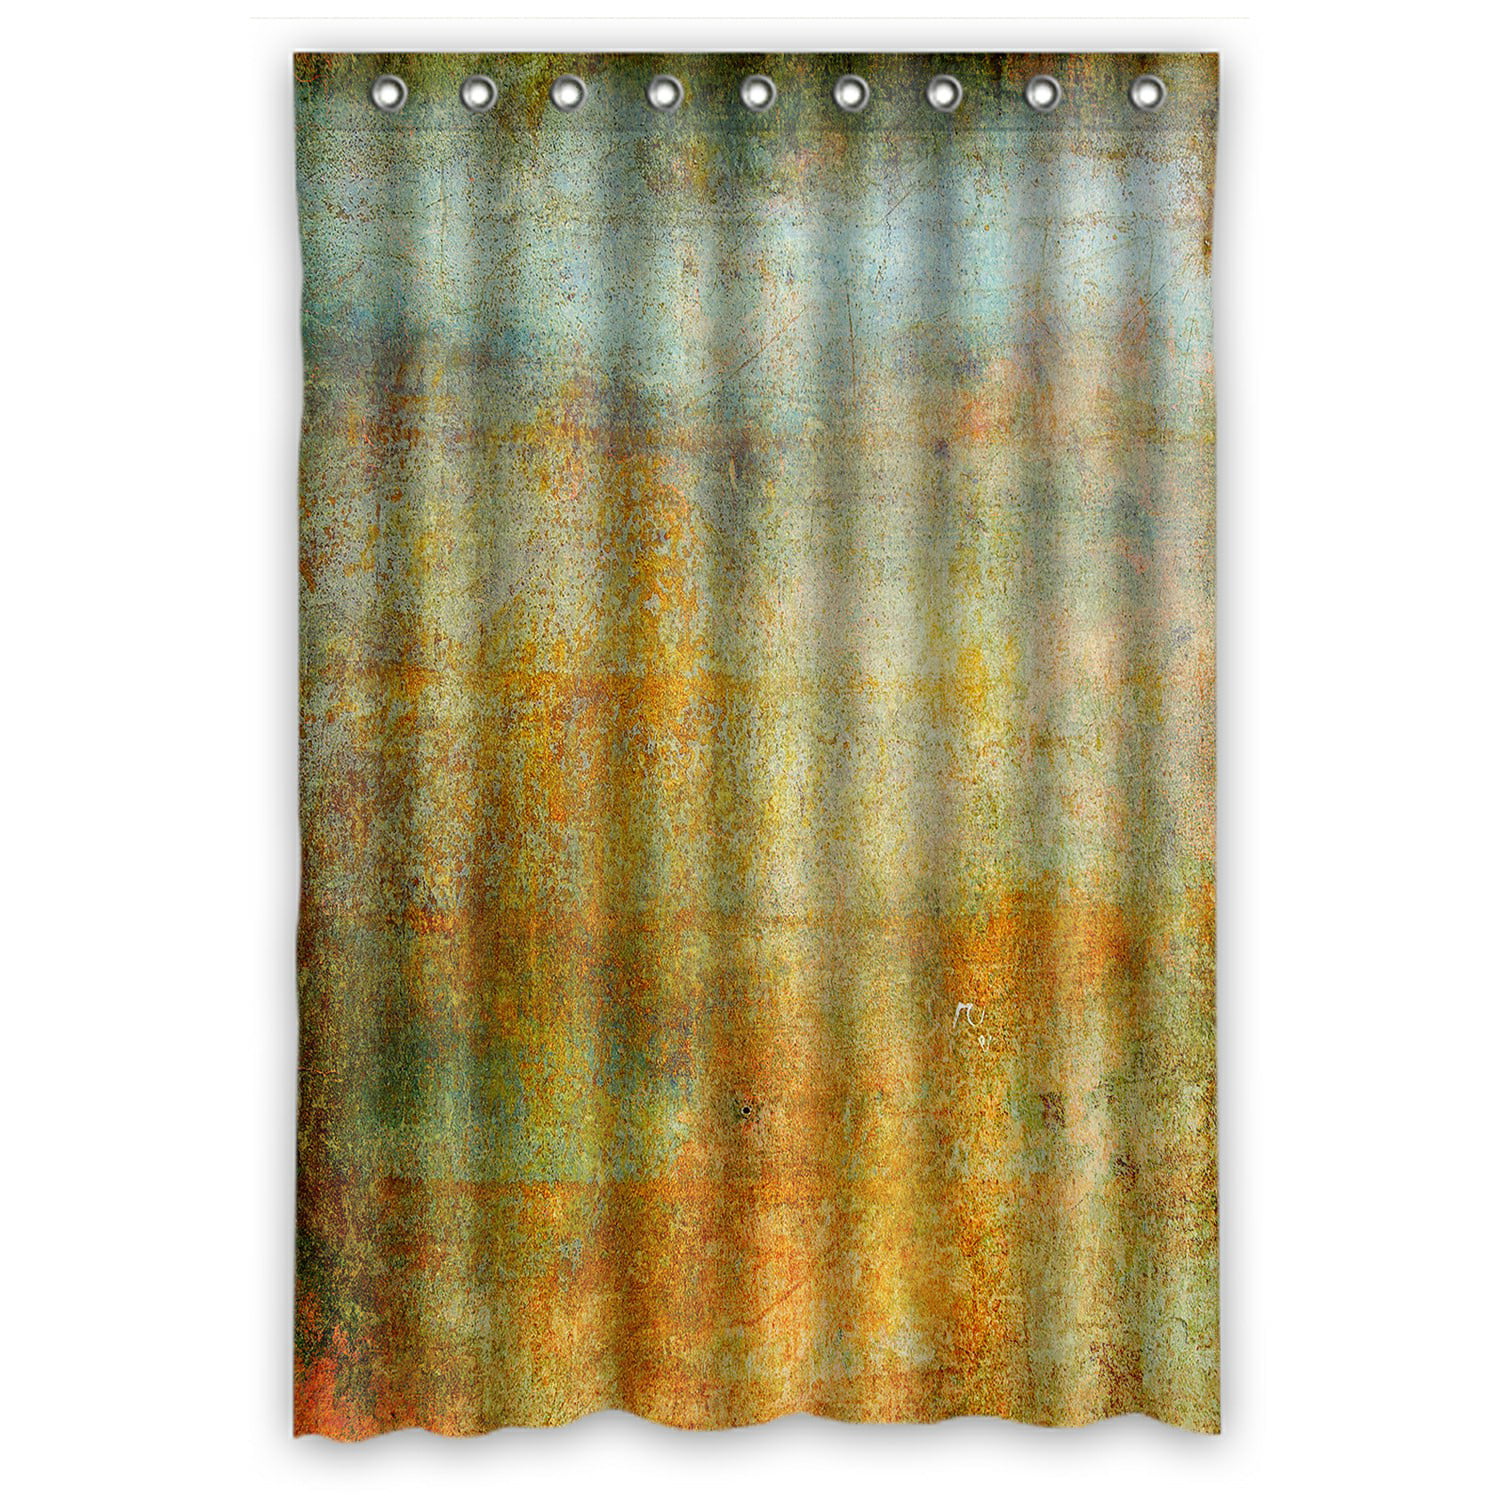 AntDesign Fabric Shower Curtain Bath Curtains with Cube Pattern 